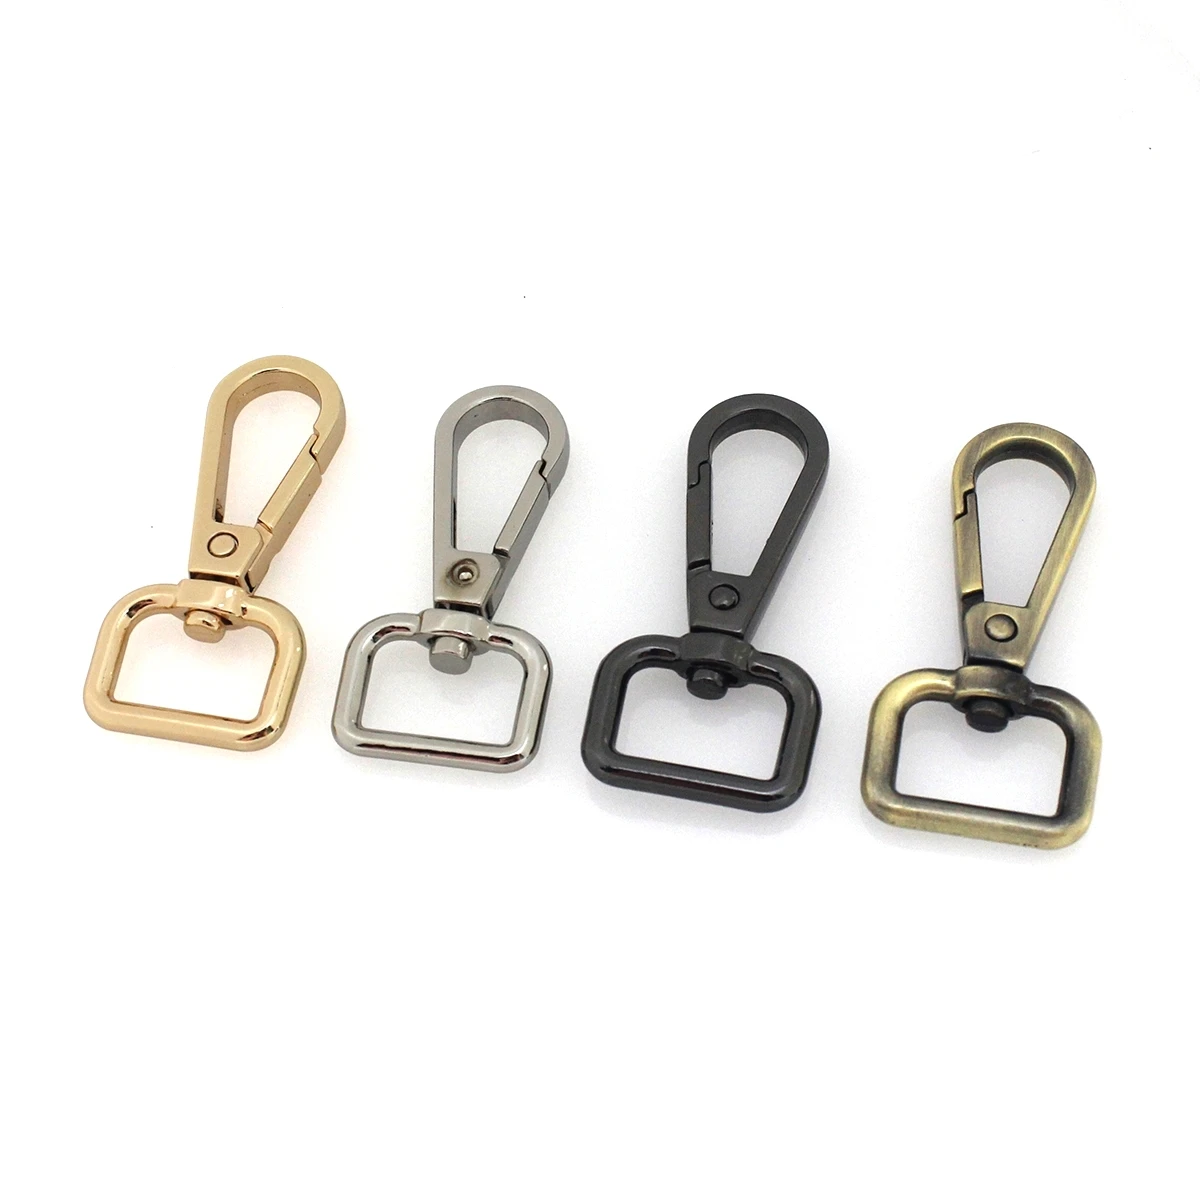 1x Snap Hook Stainless Steel Trigger Swivel Eye Bolt For webbing Leather  Craft Bag Strap Belt Clasp Pet Dog Leash Clip Quality - AliExpress